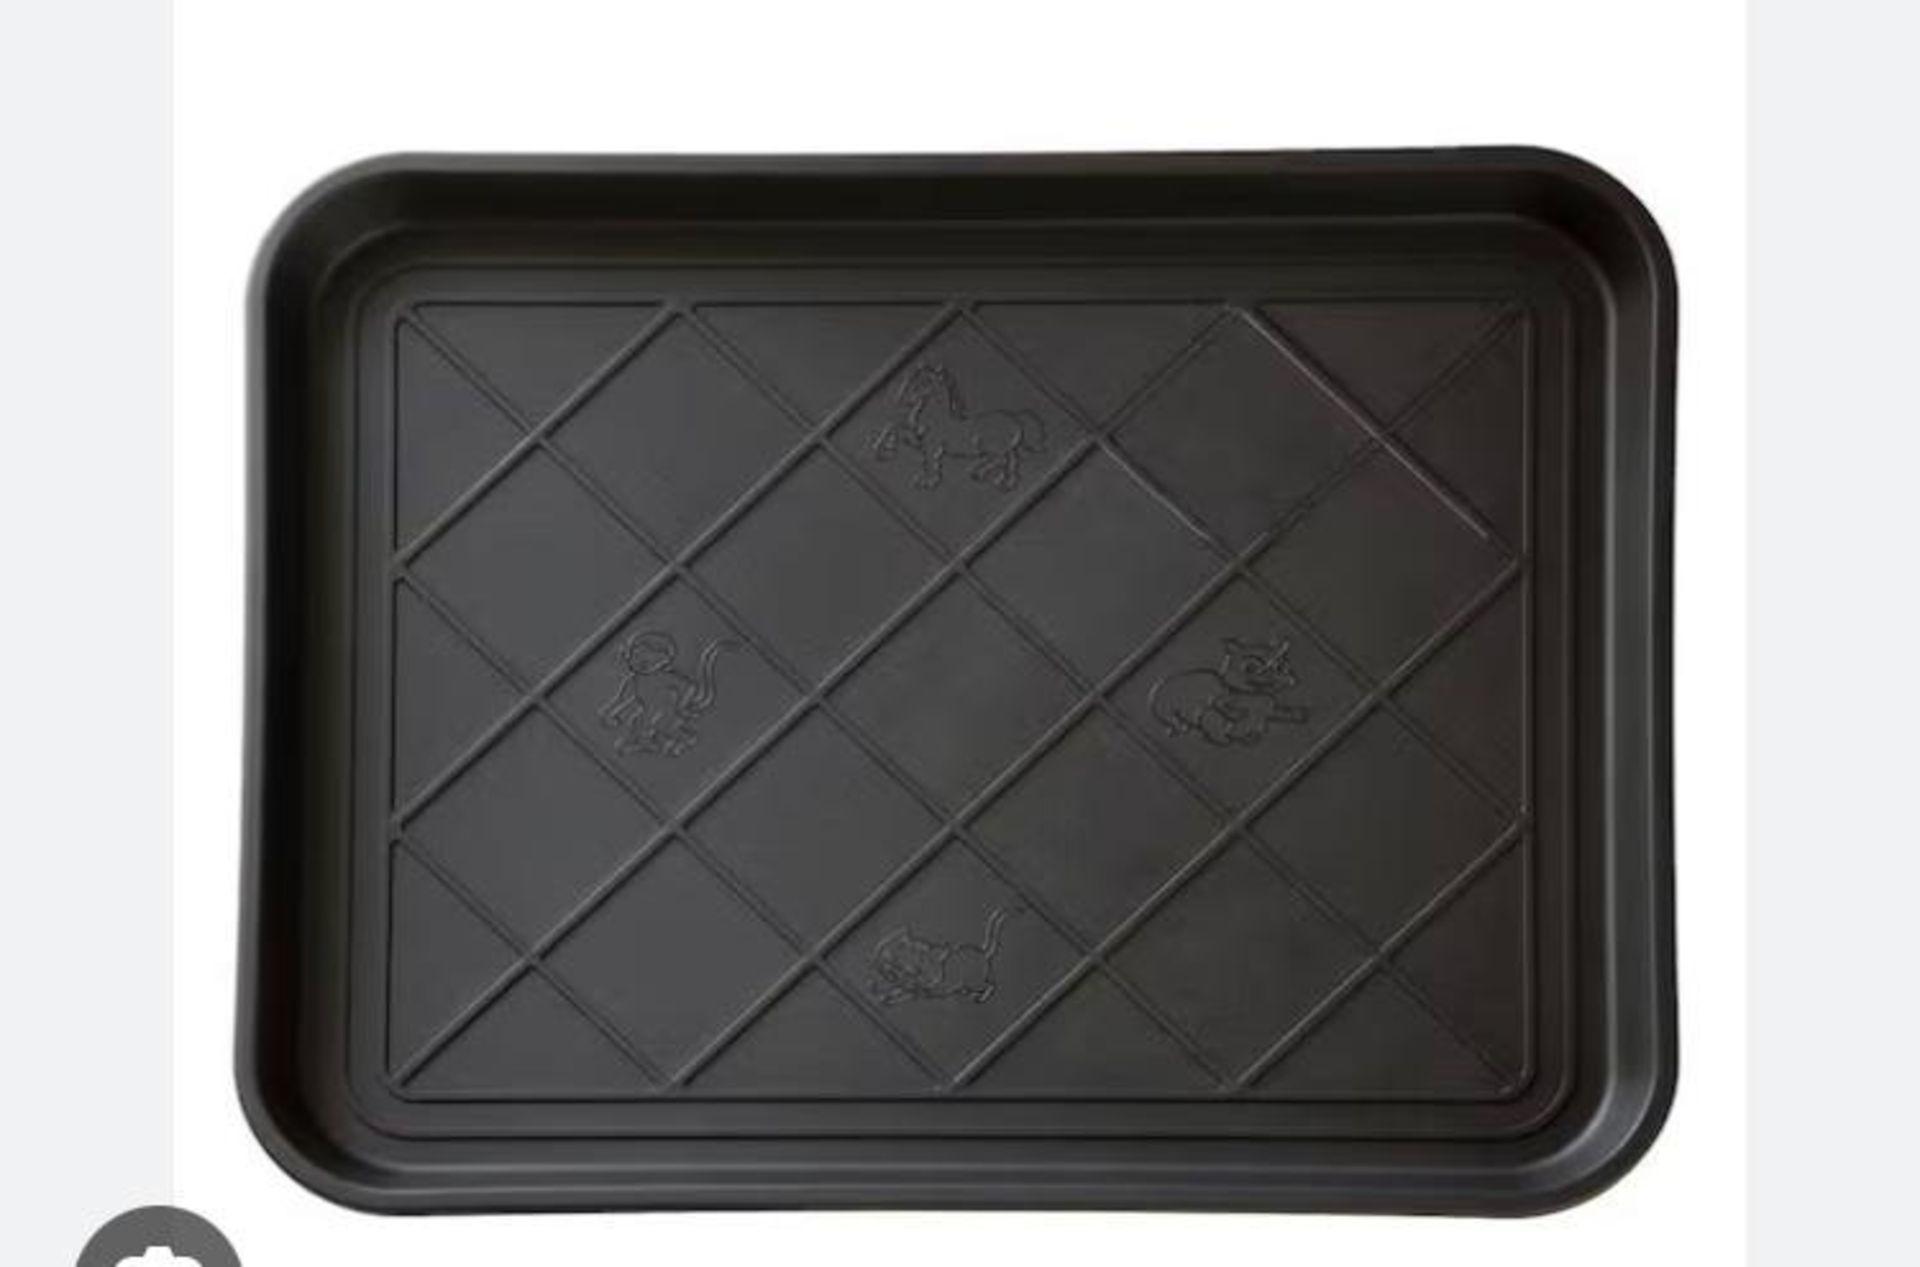 RRP £24.99 X1 pack of 2 black Car boot tidy trays